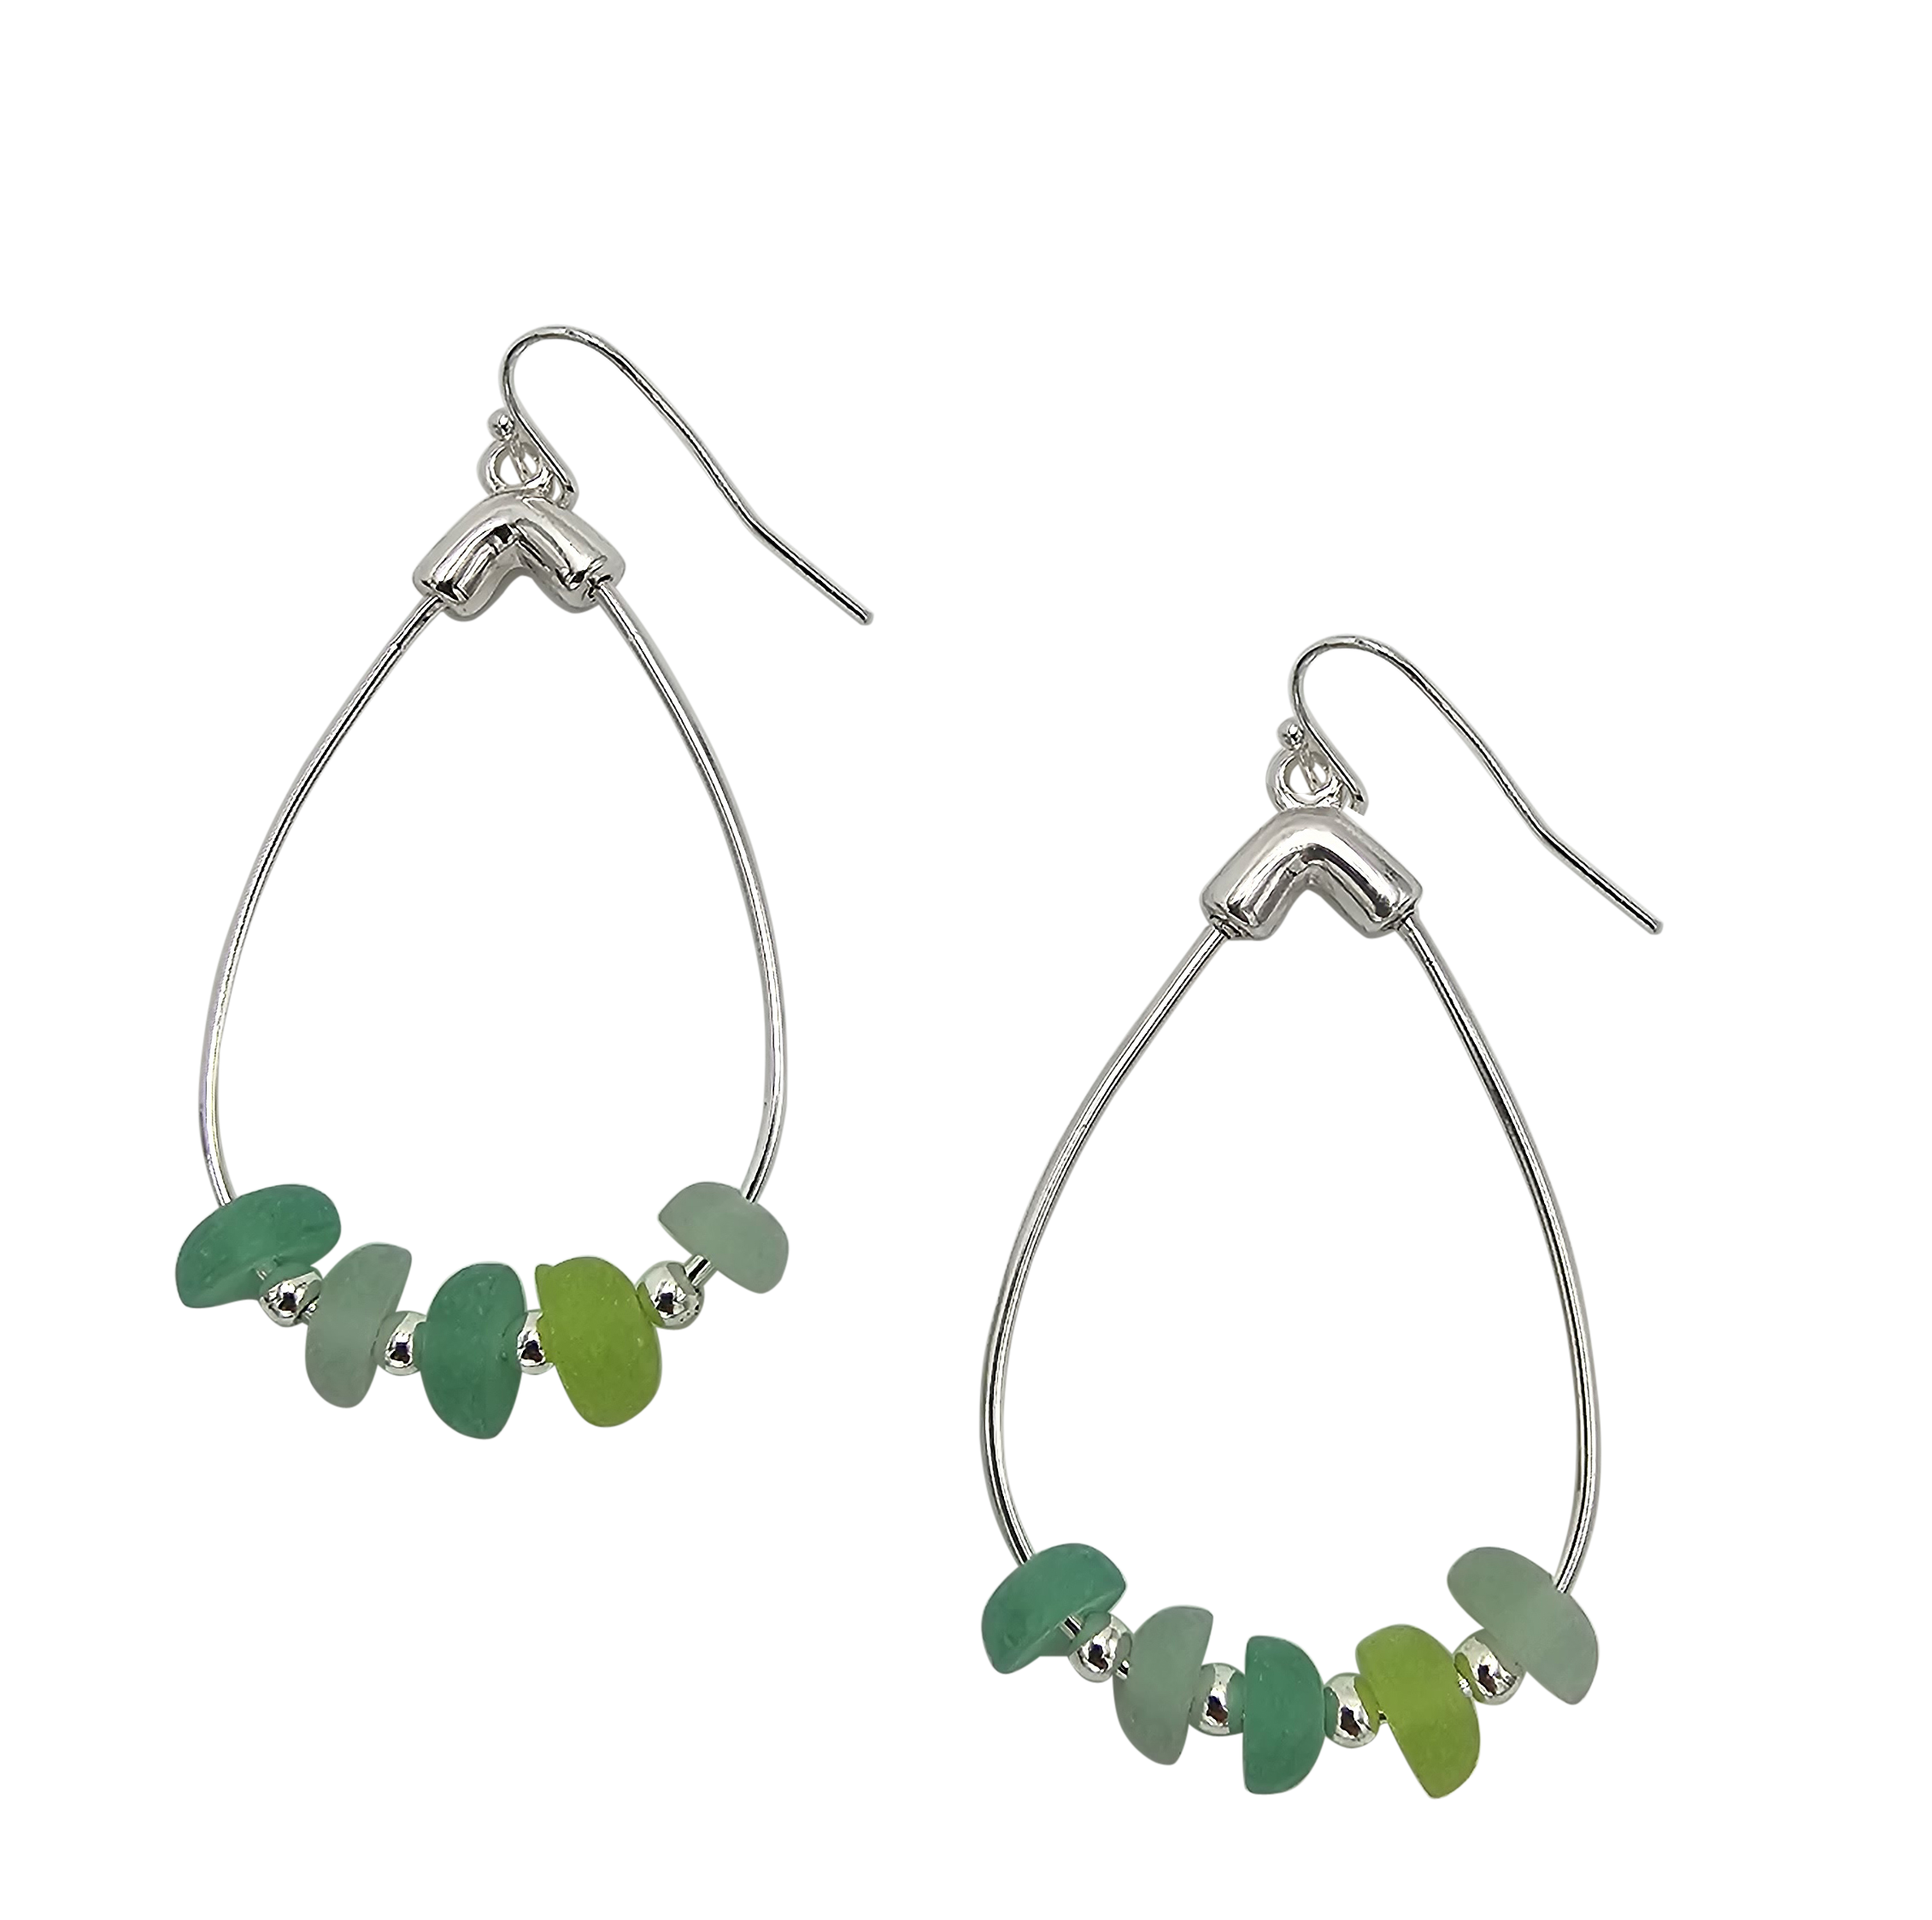 Stunning Natural Sea Glass Shades Of Green Beads On Silver Tone Hoop Earrings, 2.25"